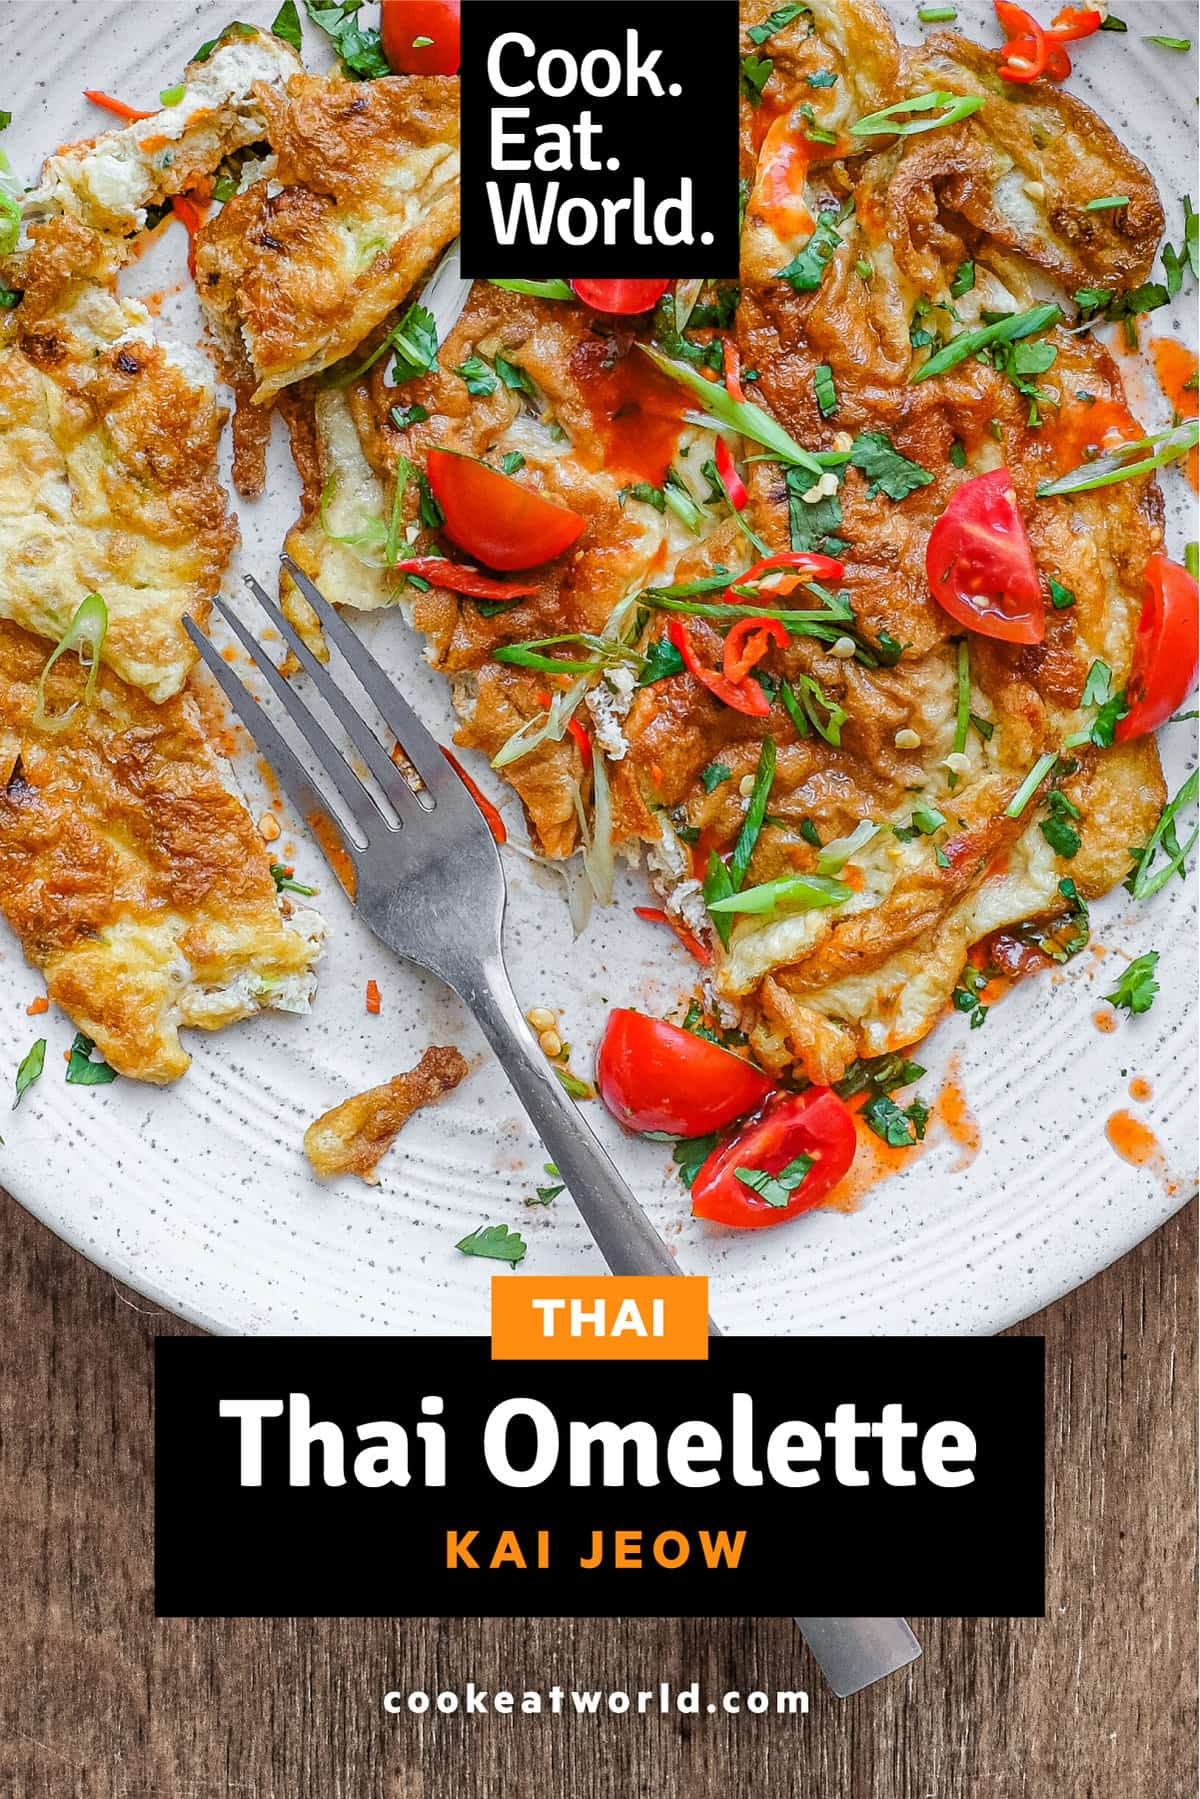 A plate of Thai Omelette with a fork.